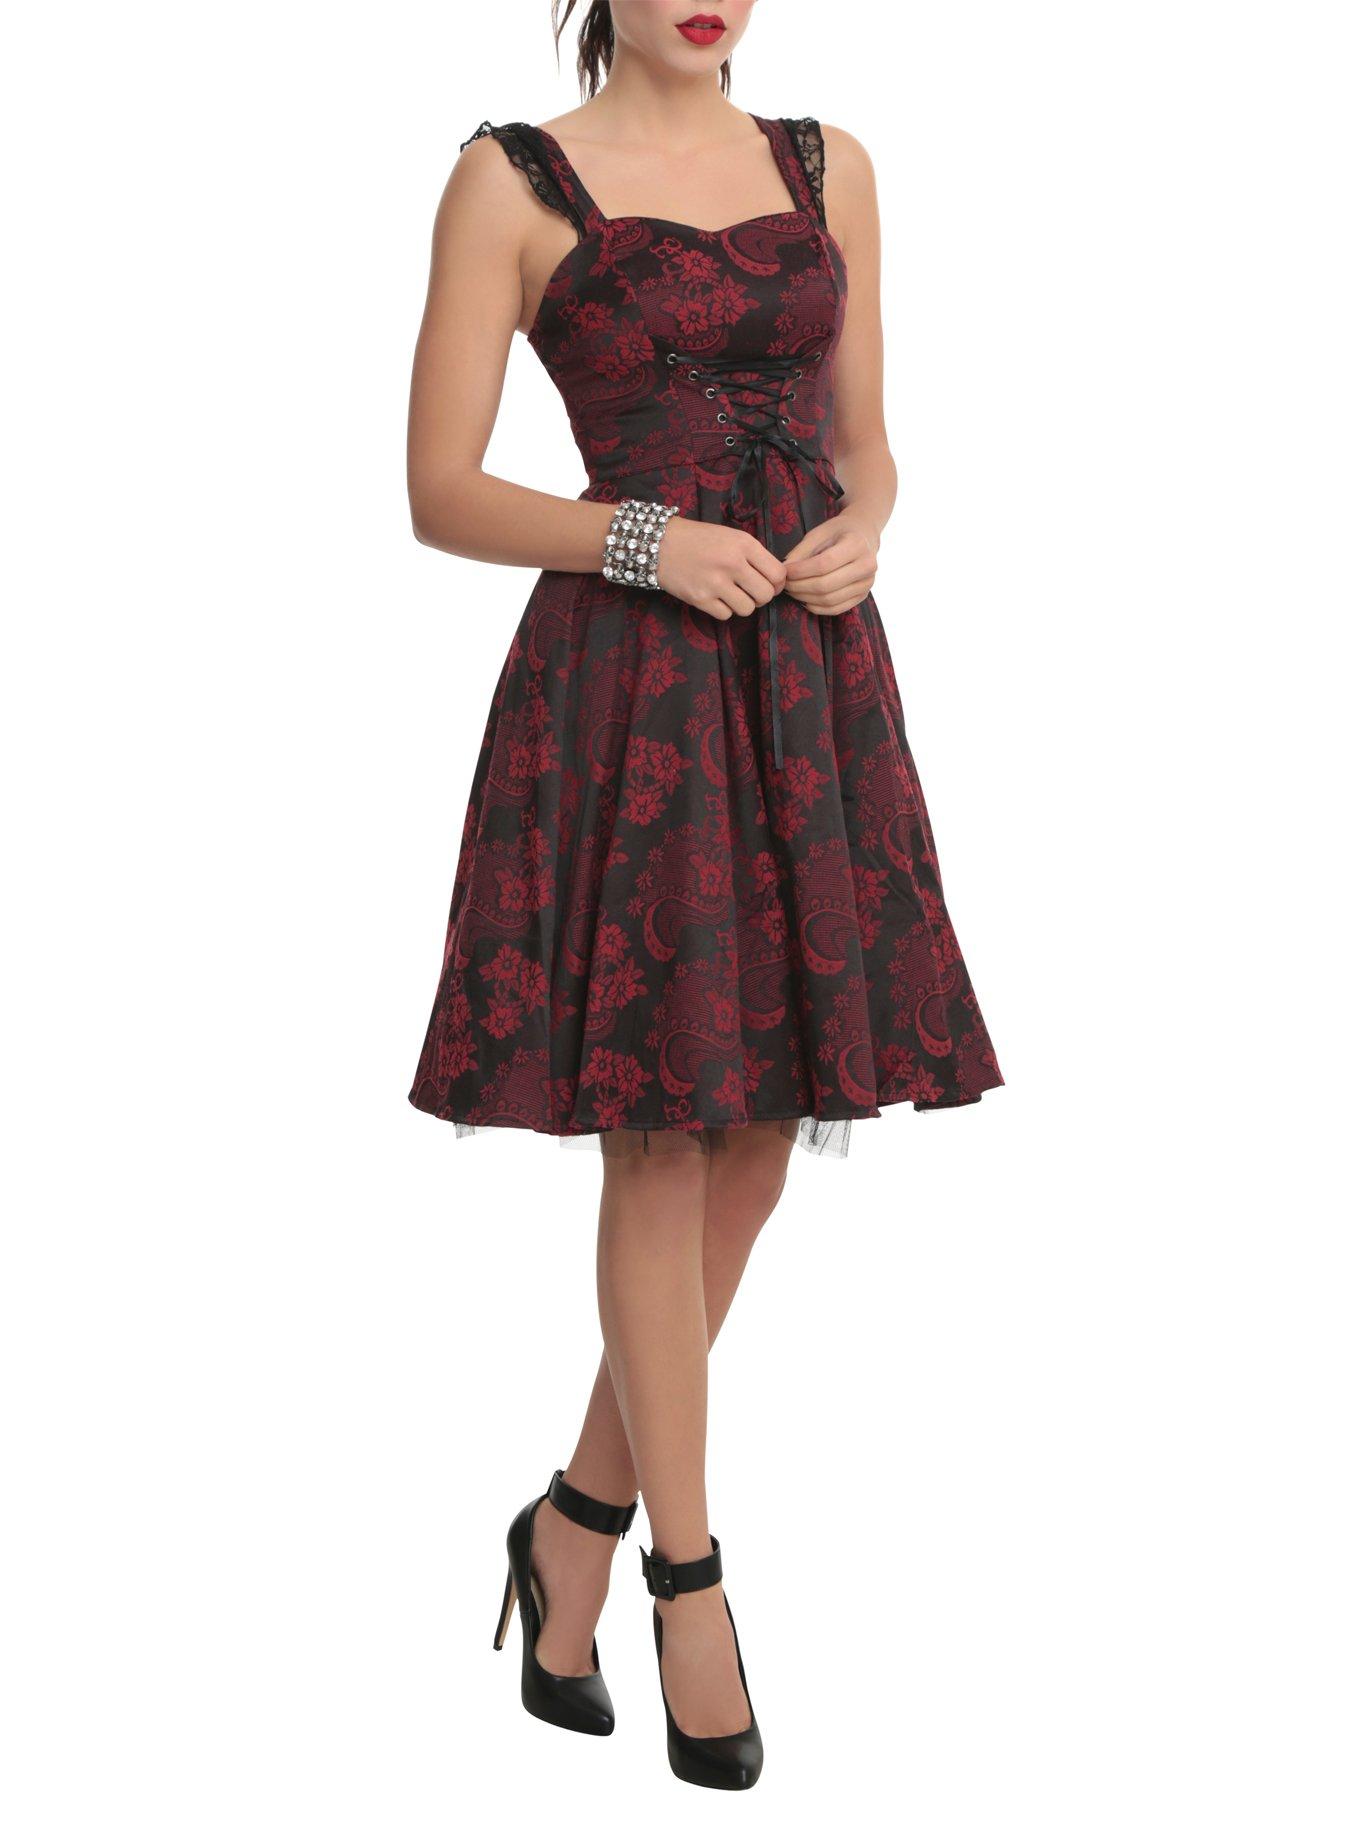 Care and Maintenance of Red Dresses with Black Lace